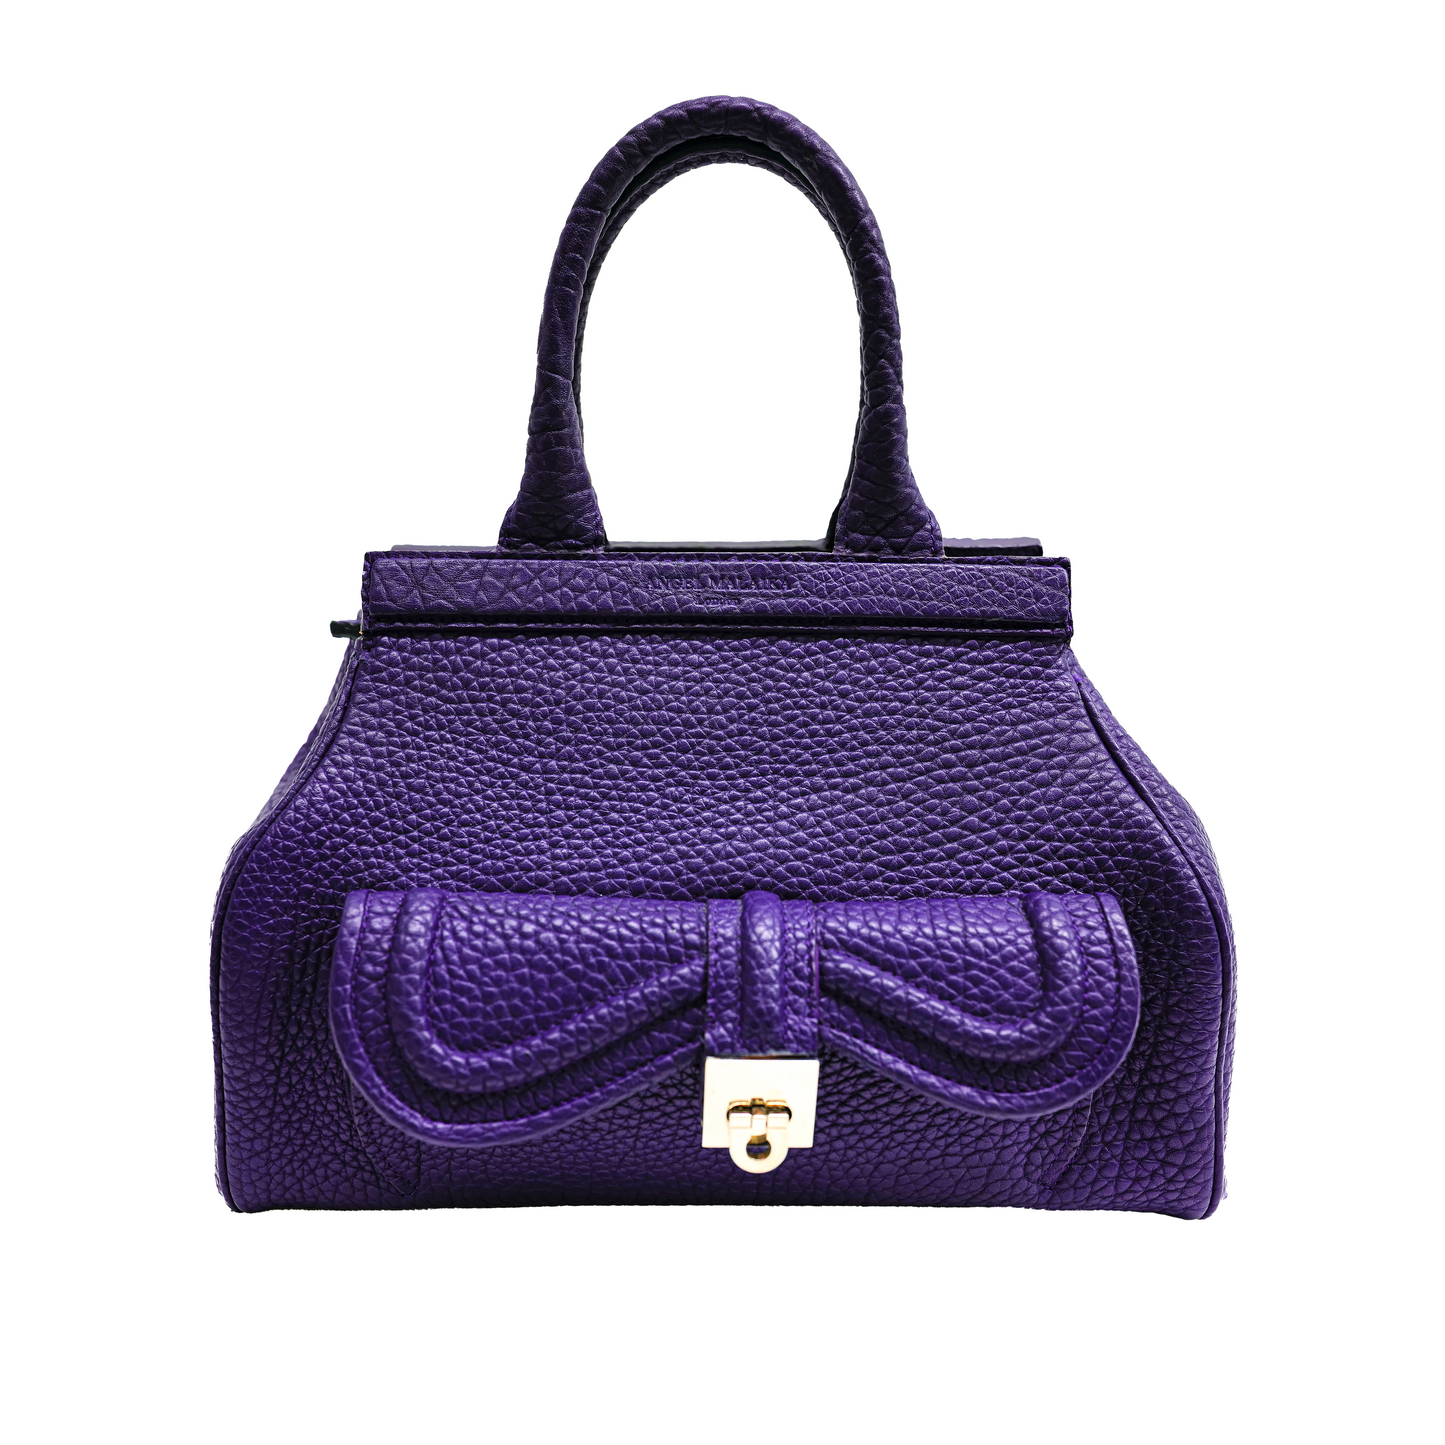 Angel bags - Browse our extensive collection of handbags and find the perfect accessory to elevate your style. Our stylish handbags are designed to suit any occasion, from casual outings to formal events. Explore our Angel bags